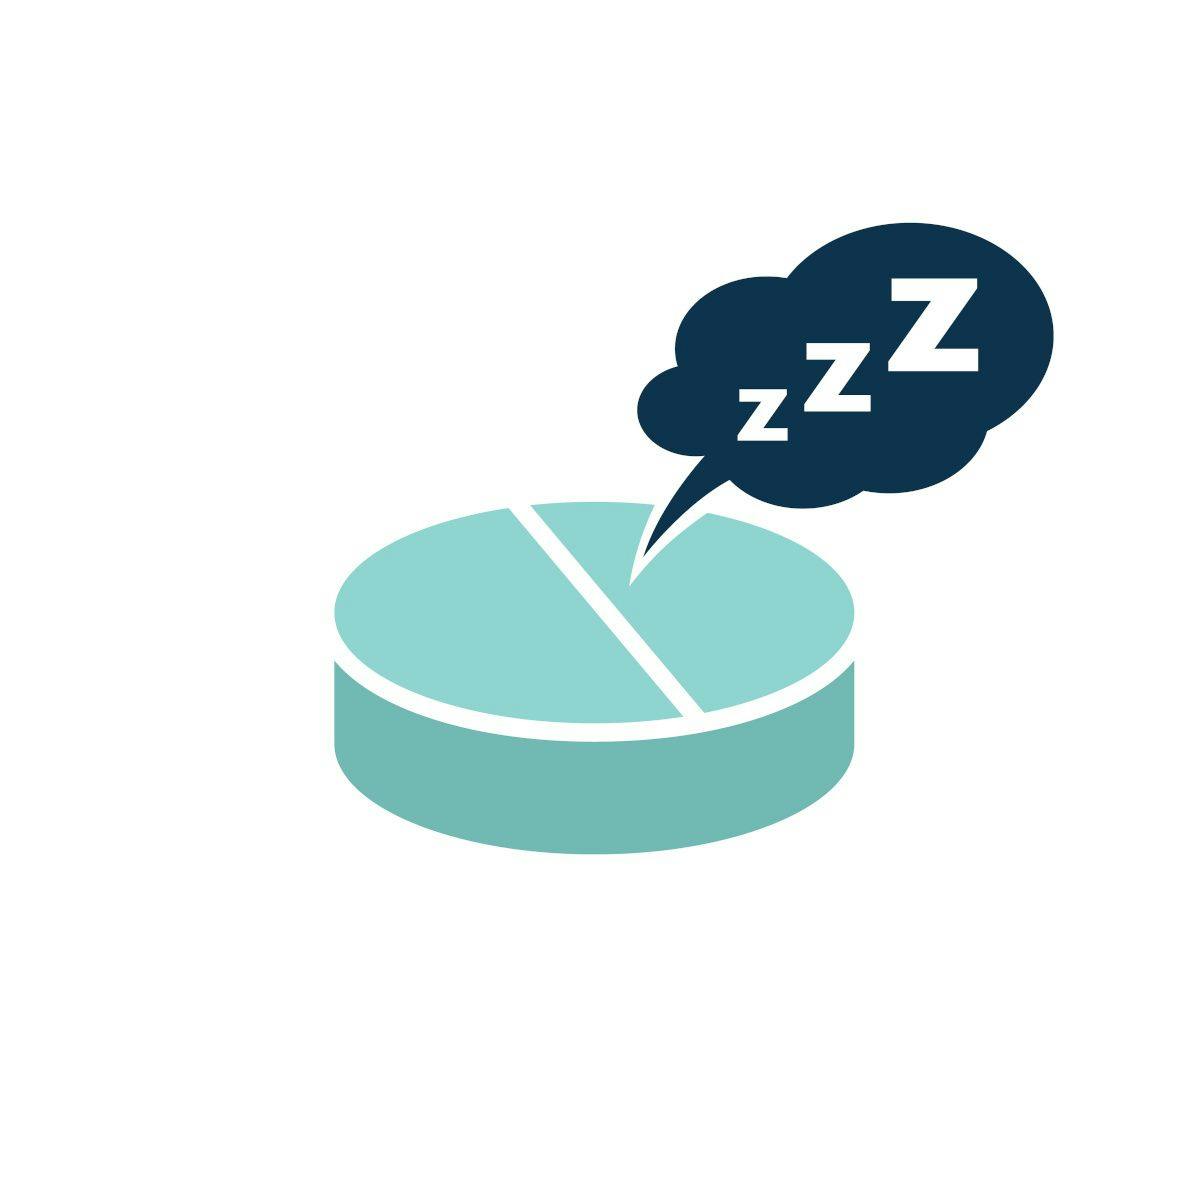 illustration of tablet with word cloud containing "zzz" to indicate sleep